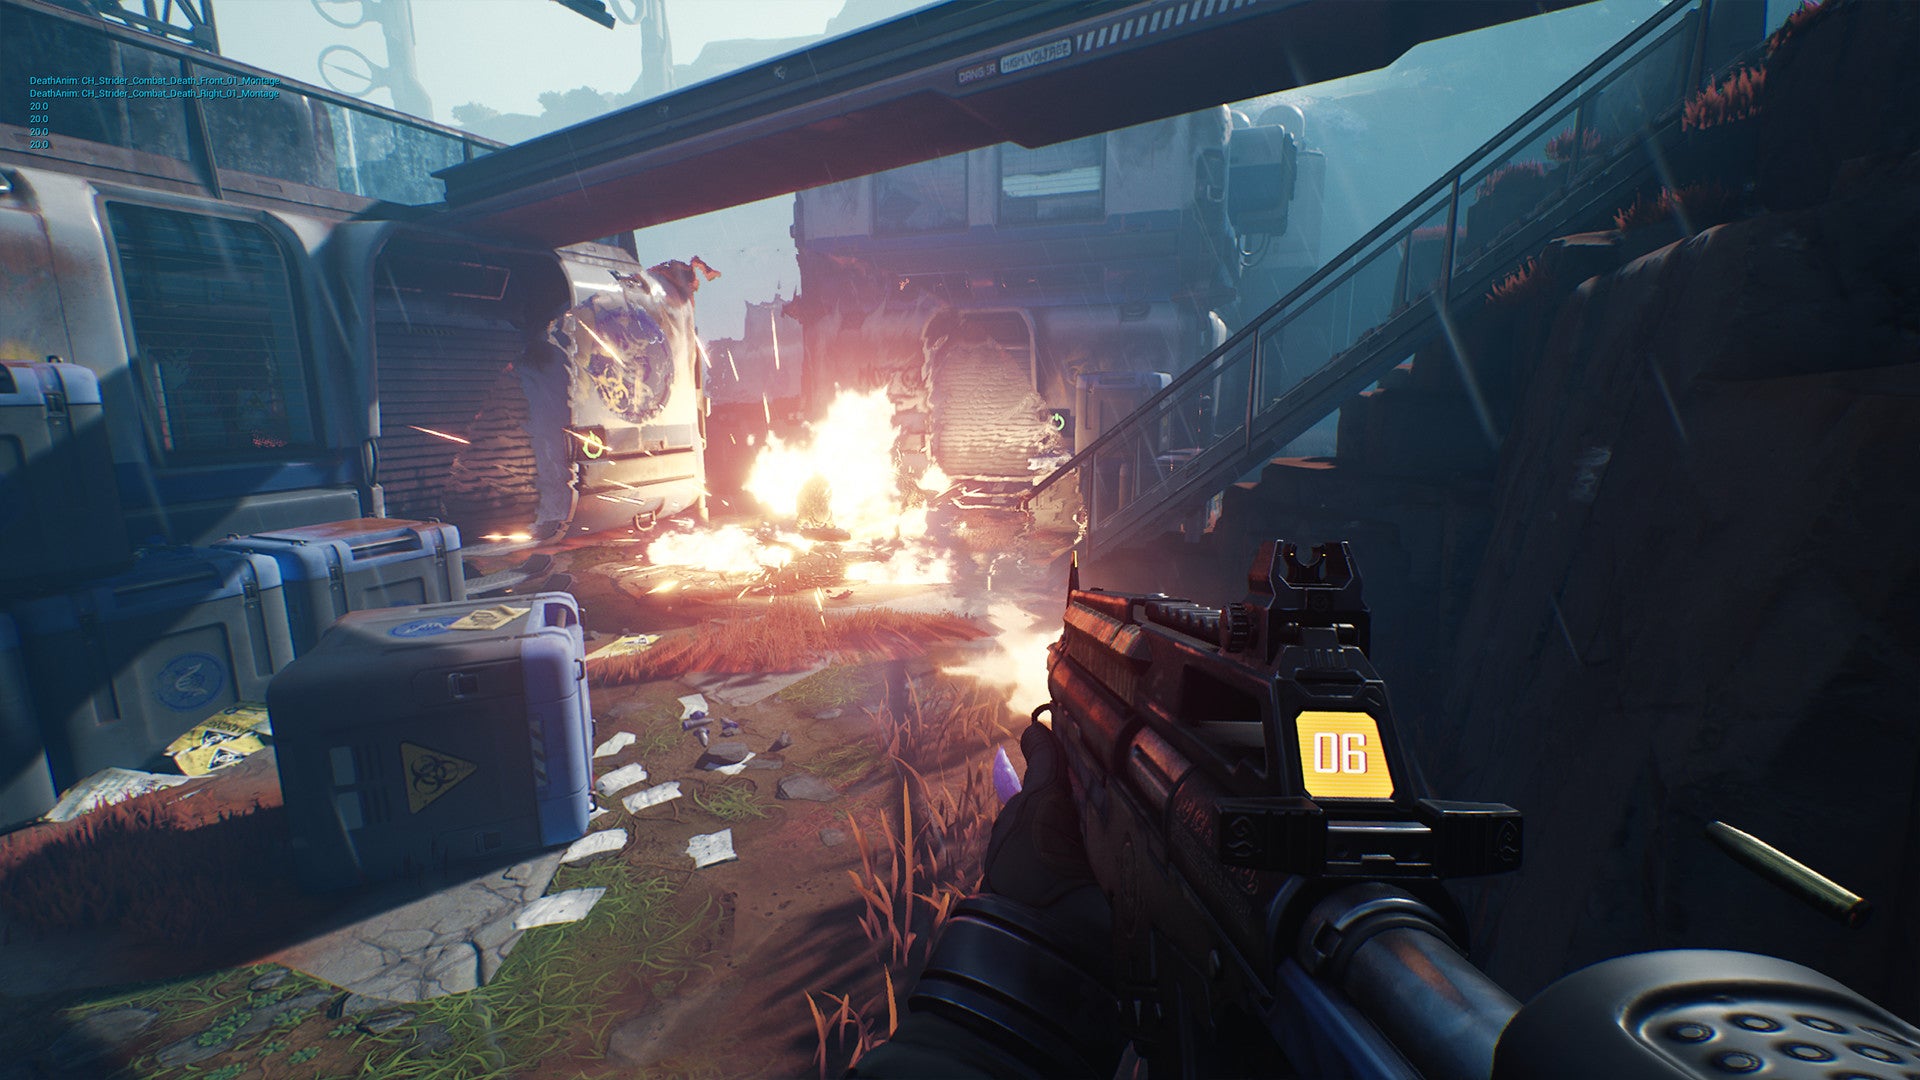 An explosion occurs in front of the player in The Cycle: Frontier.